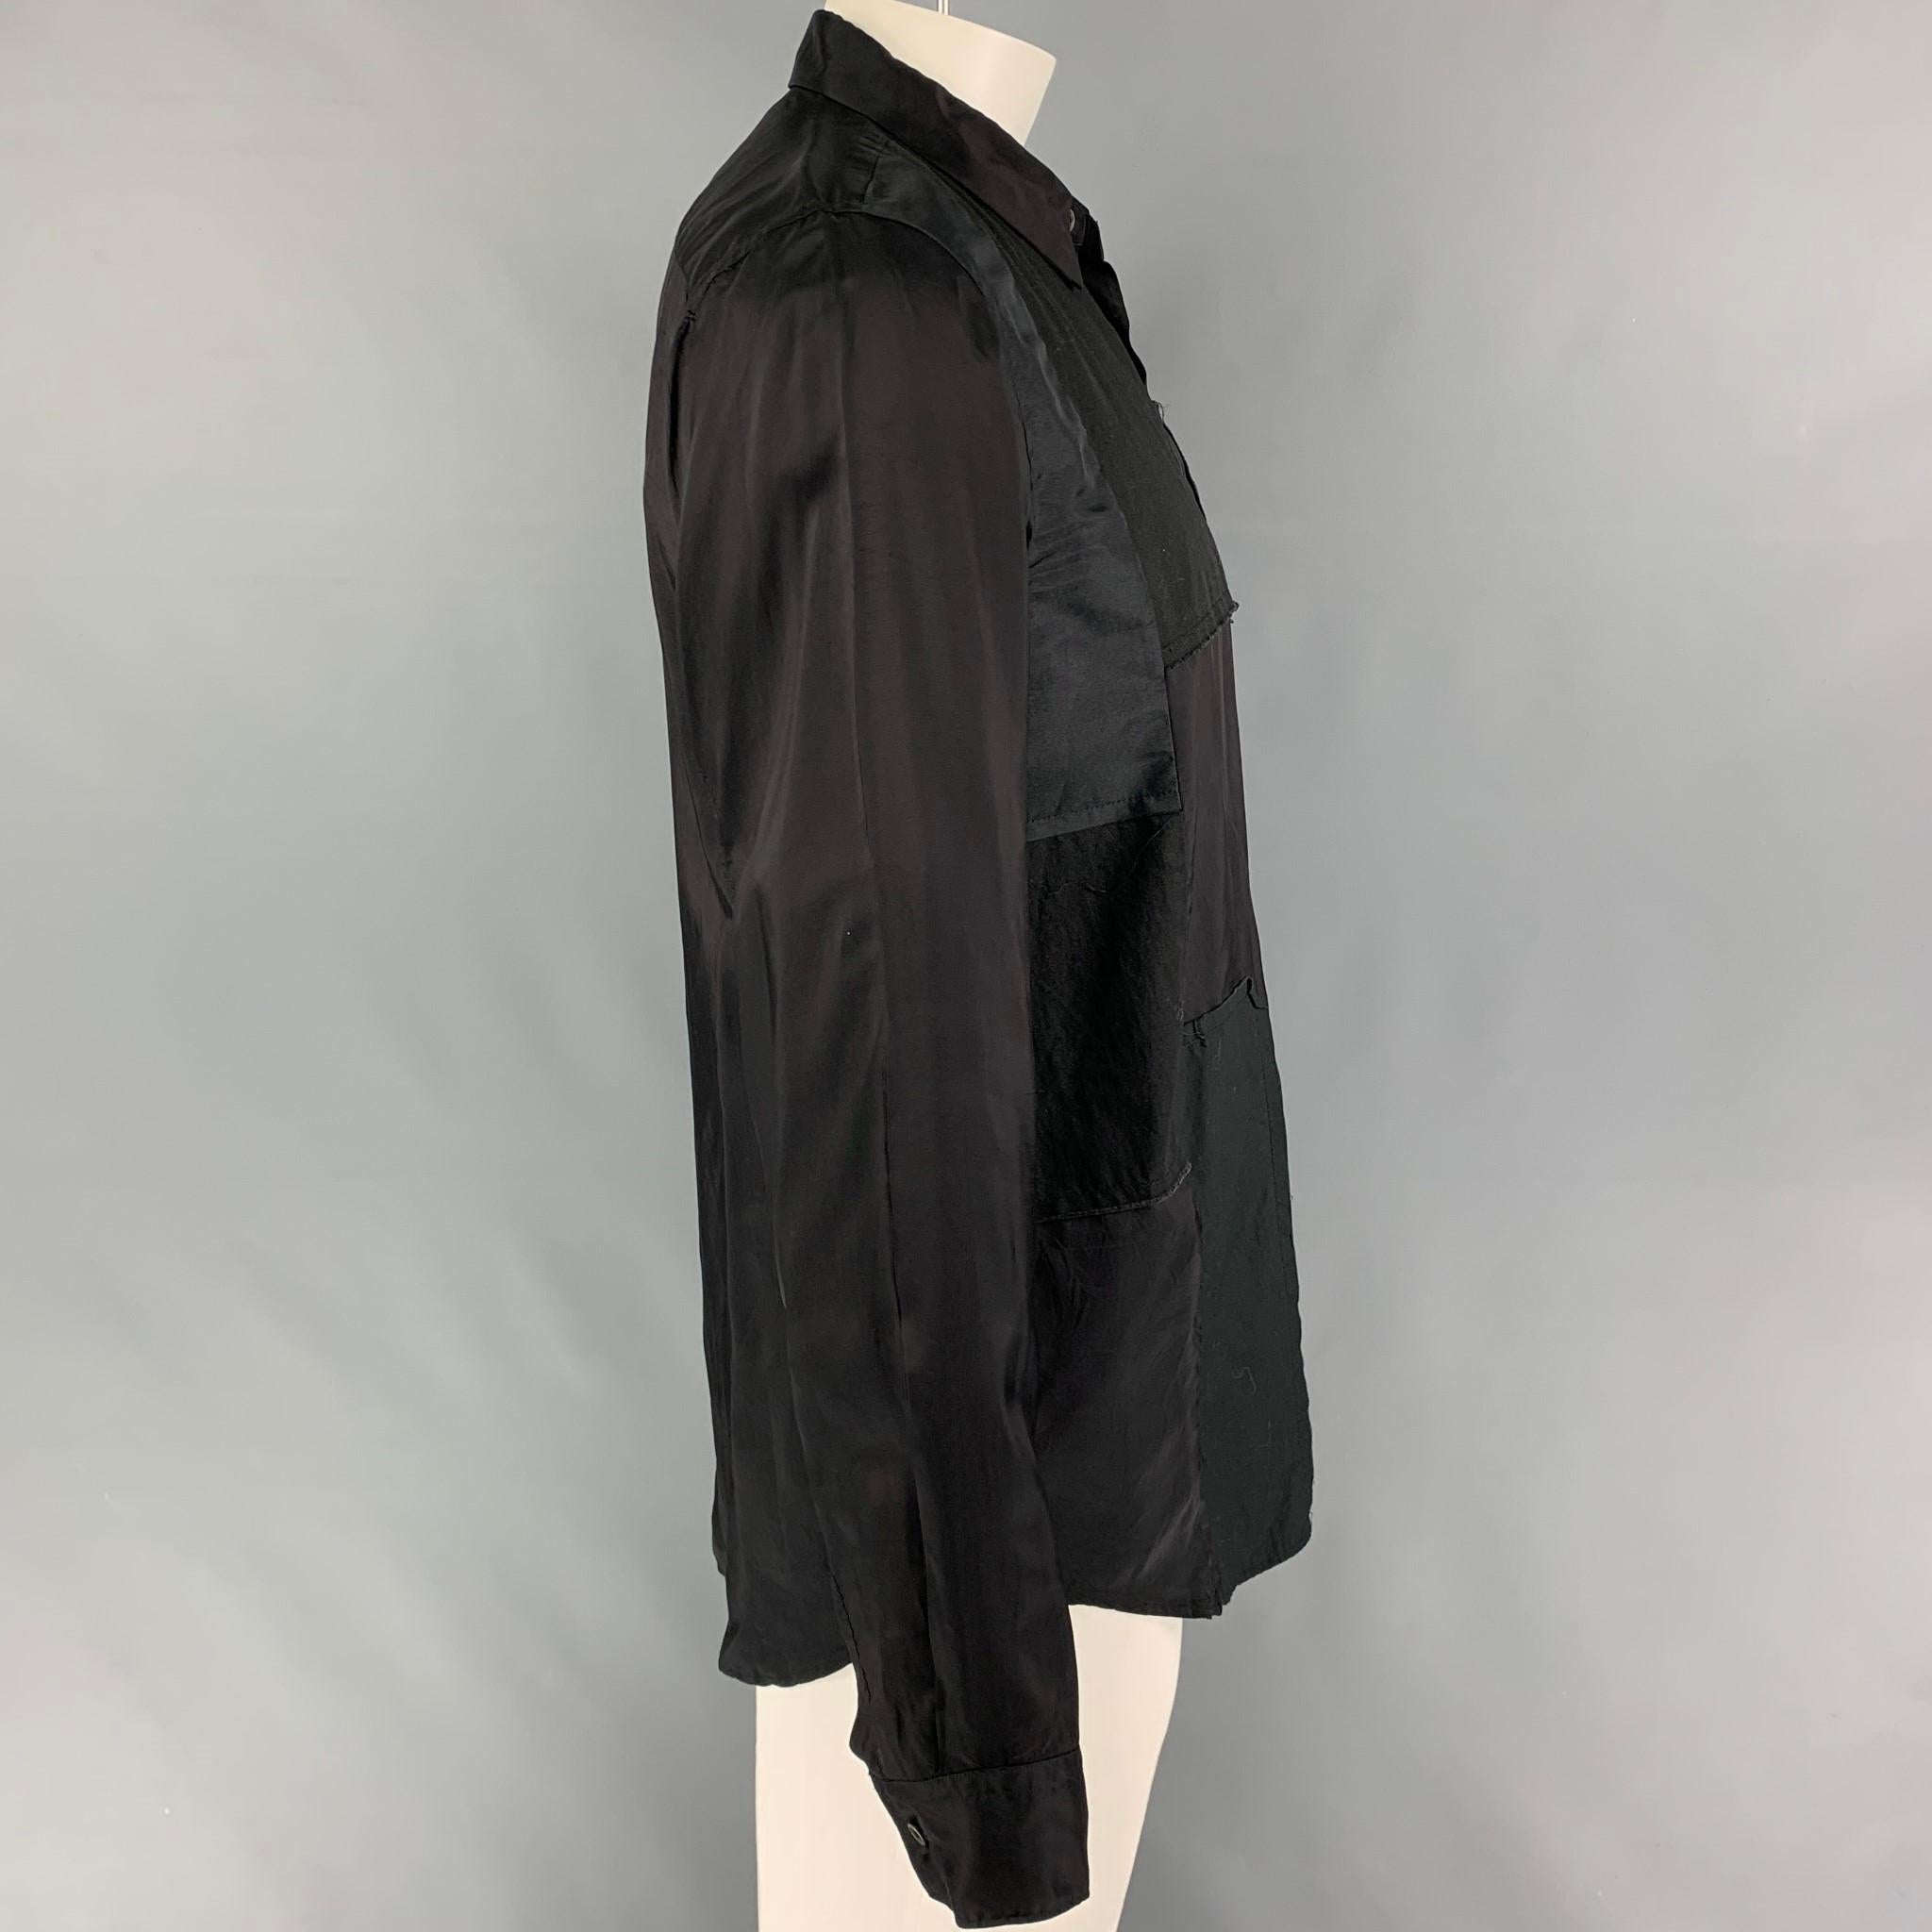 COMME des GARCONS BLACK long sleeve shirt comes in a black cotton / cupro featuring a patch work design, spread collar, and a button up closure. Made in Japan. 

Very Good Pre-Owned Condition.
Marked: XL / AD2018

Measurements:

Shoulder: 18